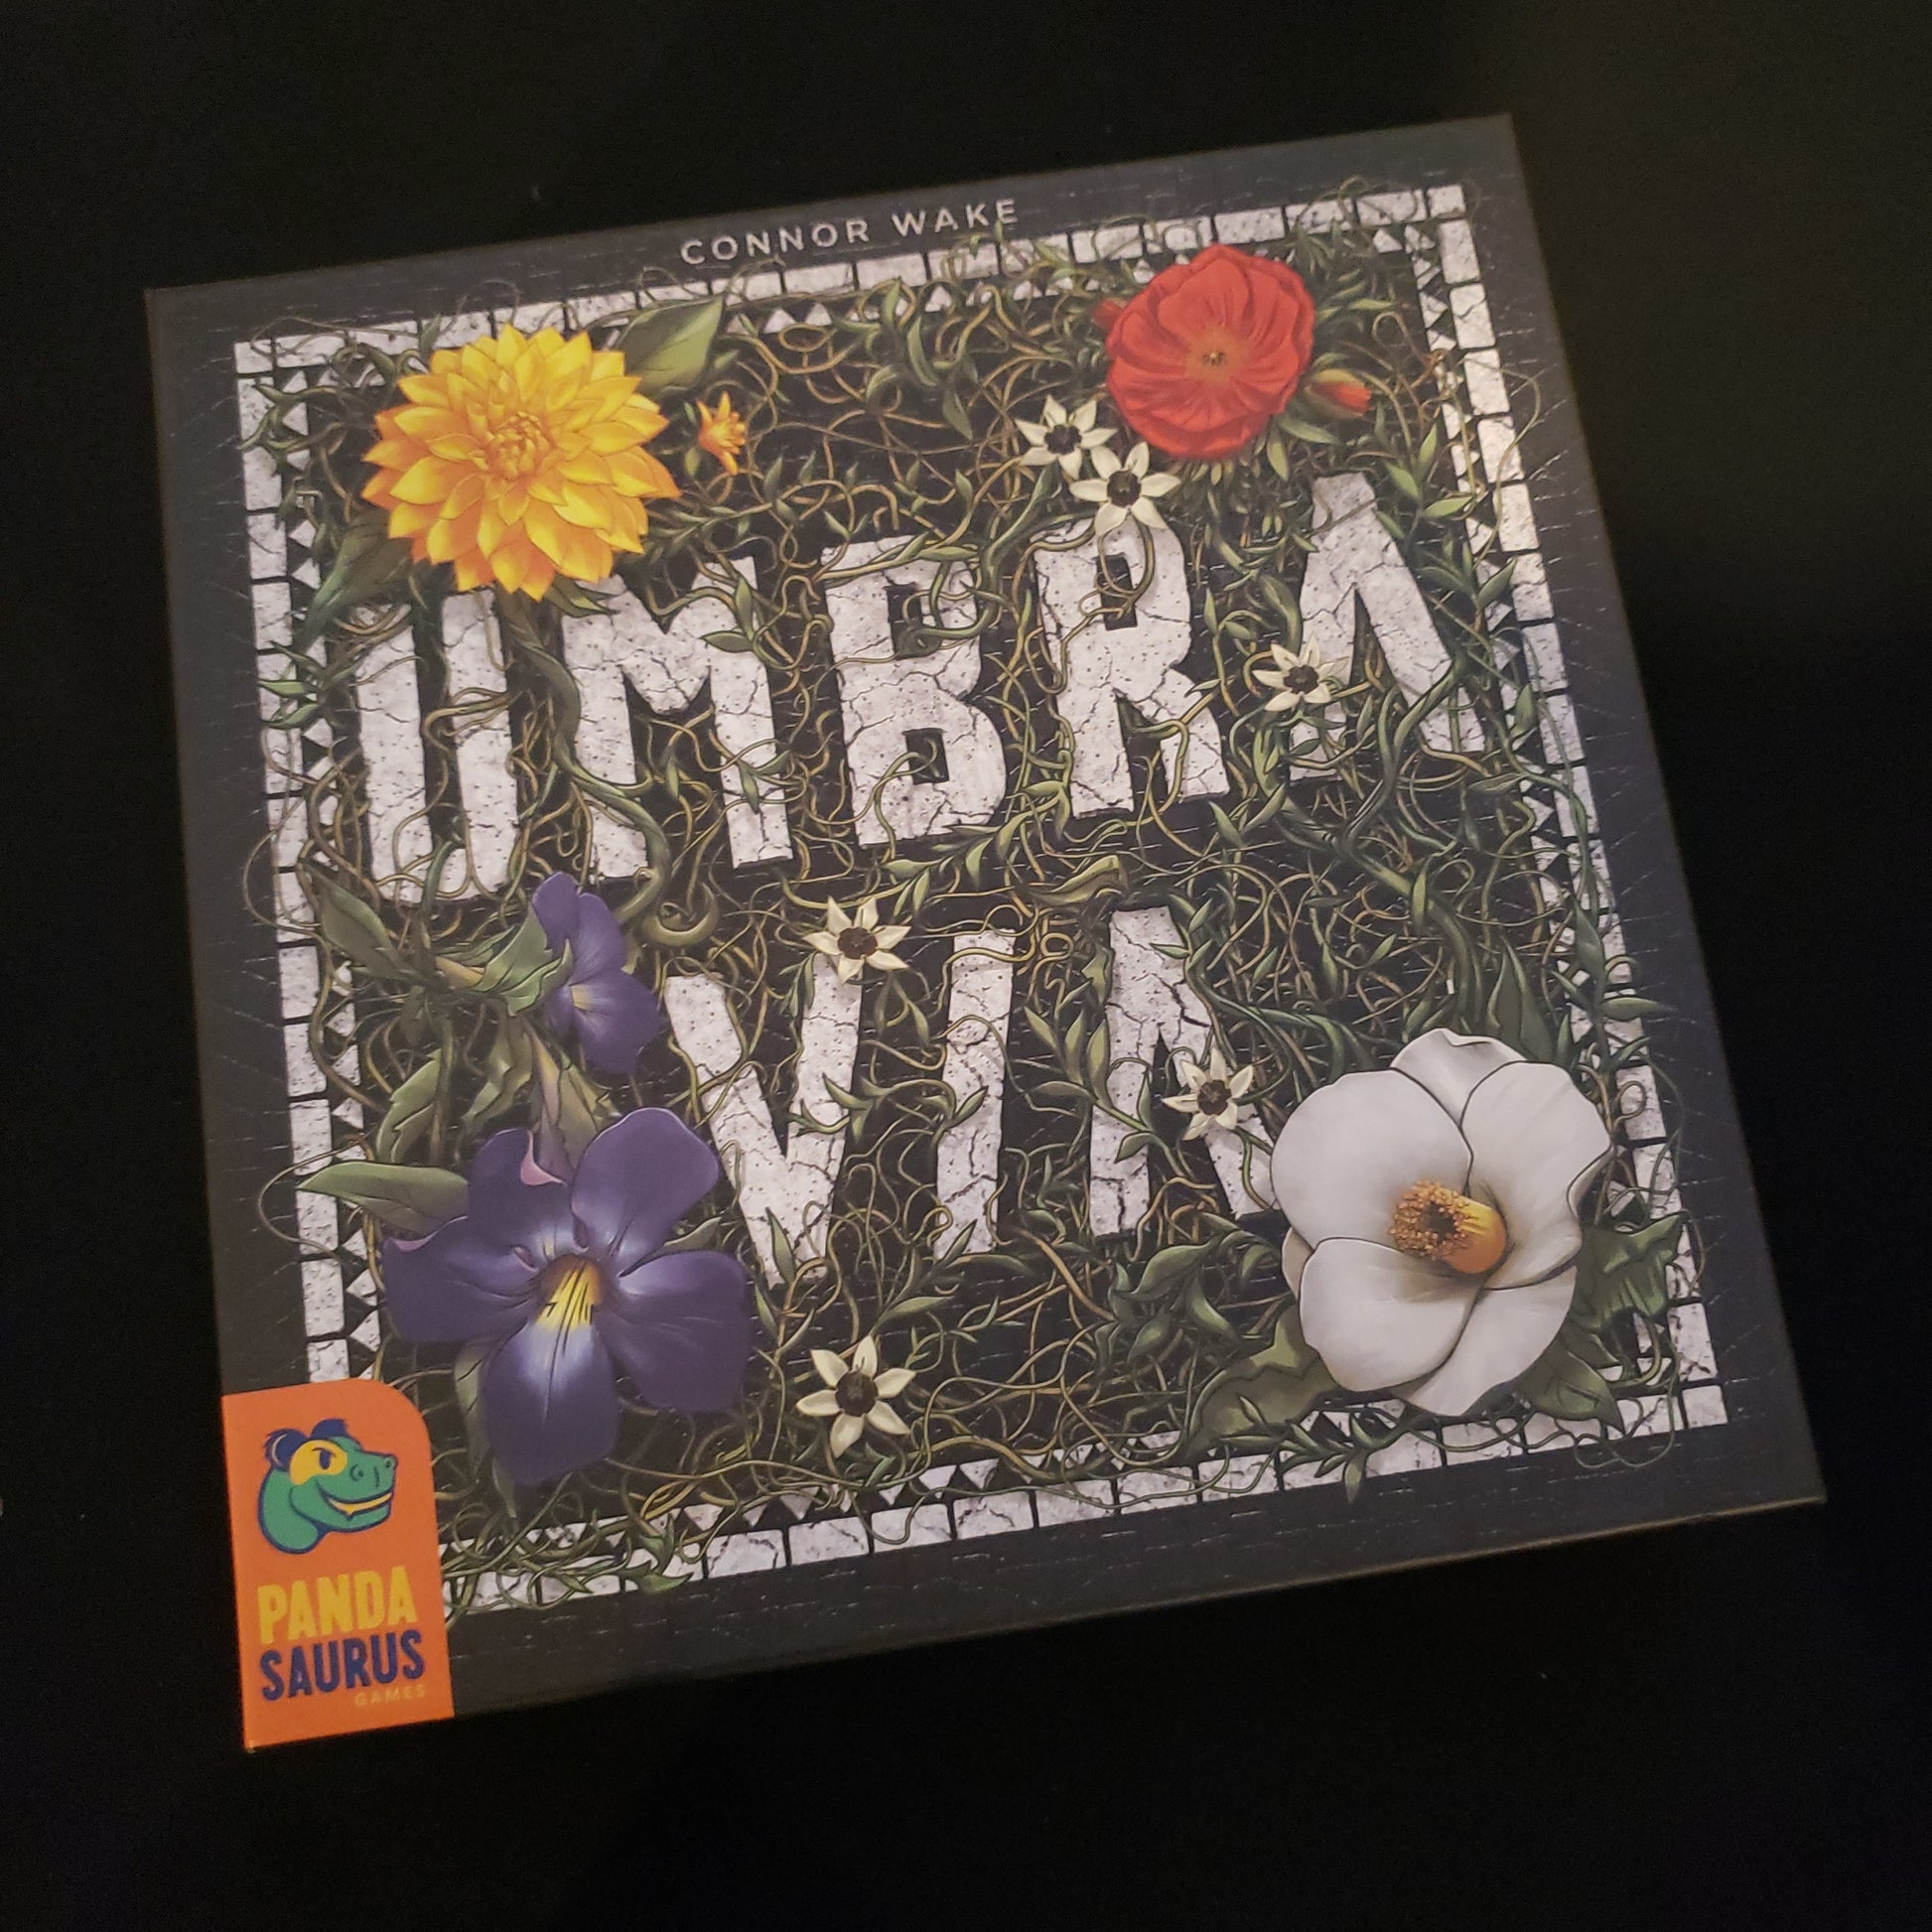 Image shows the front cover of the box of the Umbra Via board game